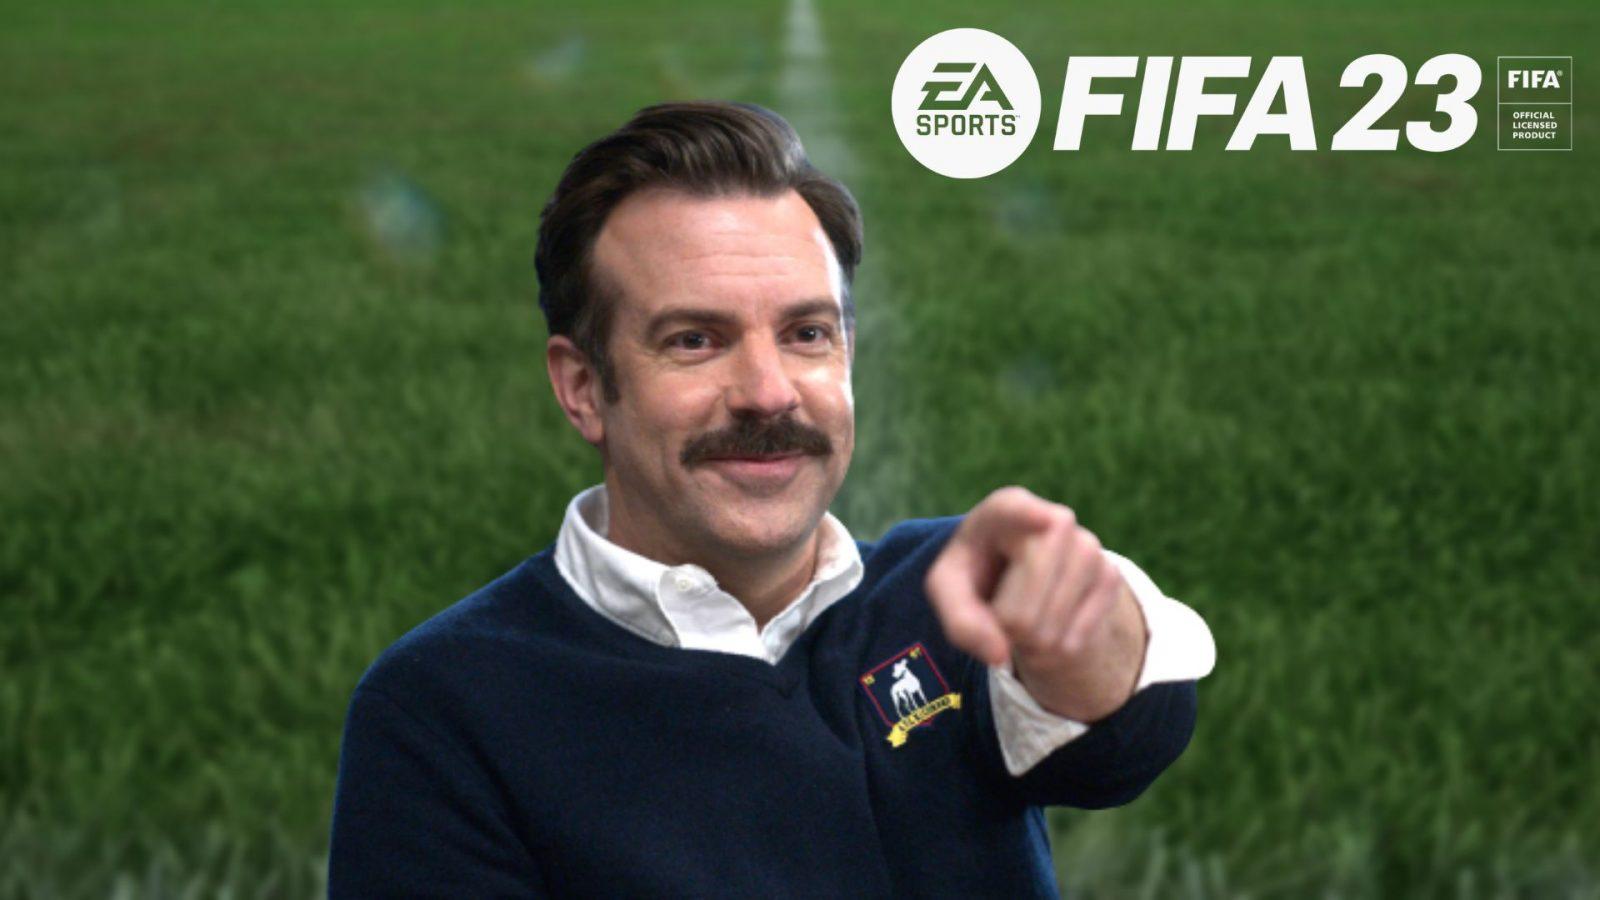 FIFA 23 Ted Lasso Ultimate Team: How to get Ted Lasso, AFC Richmond kits